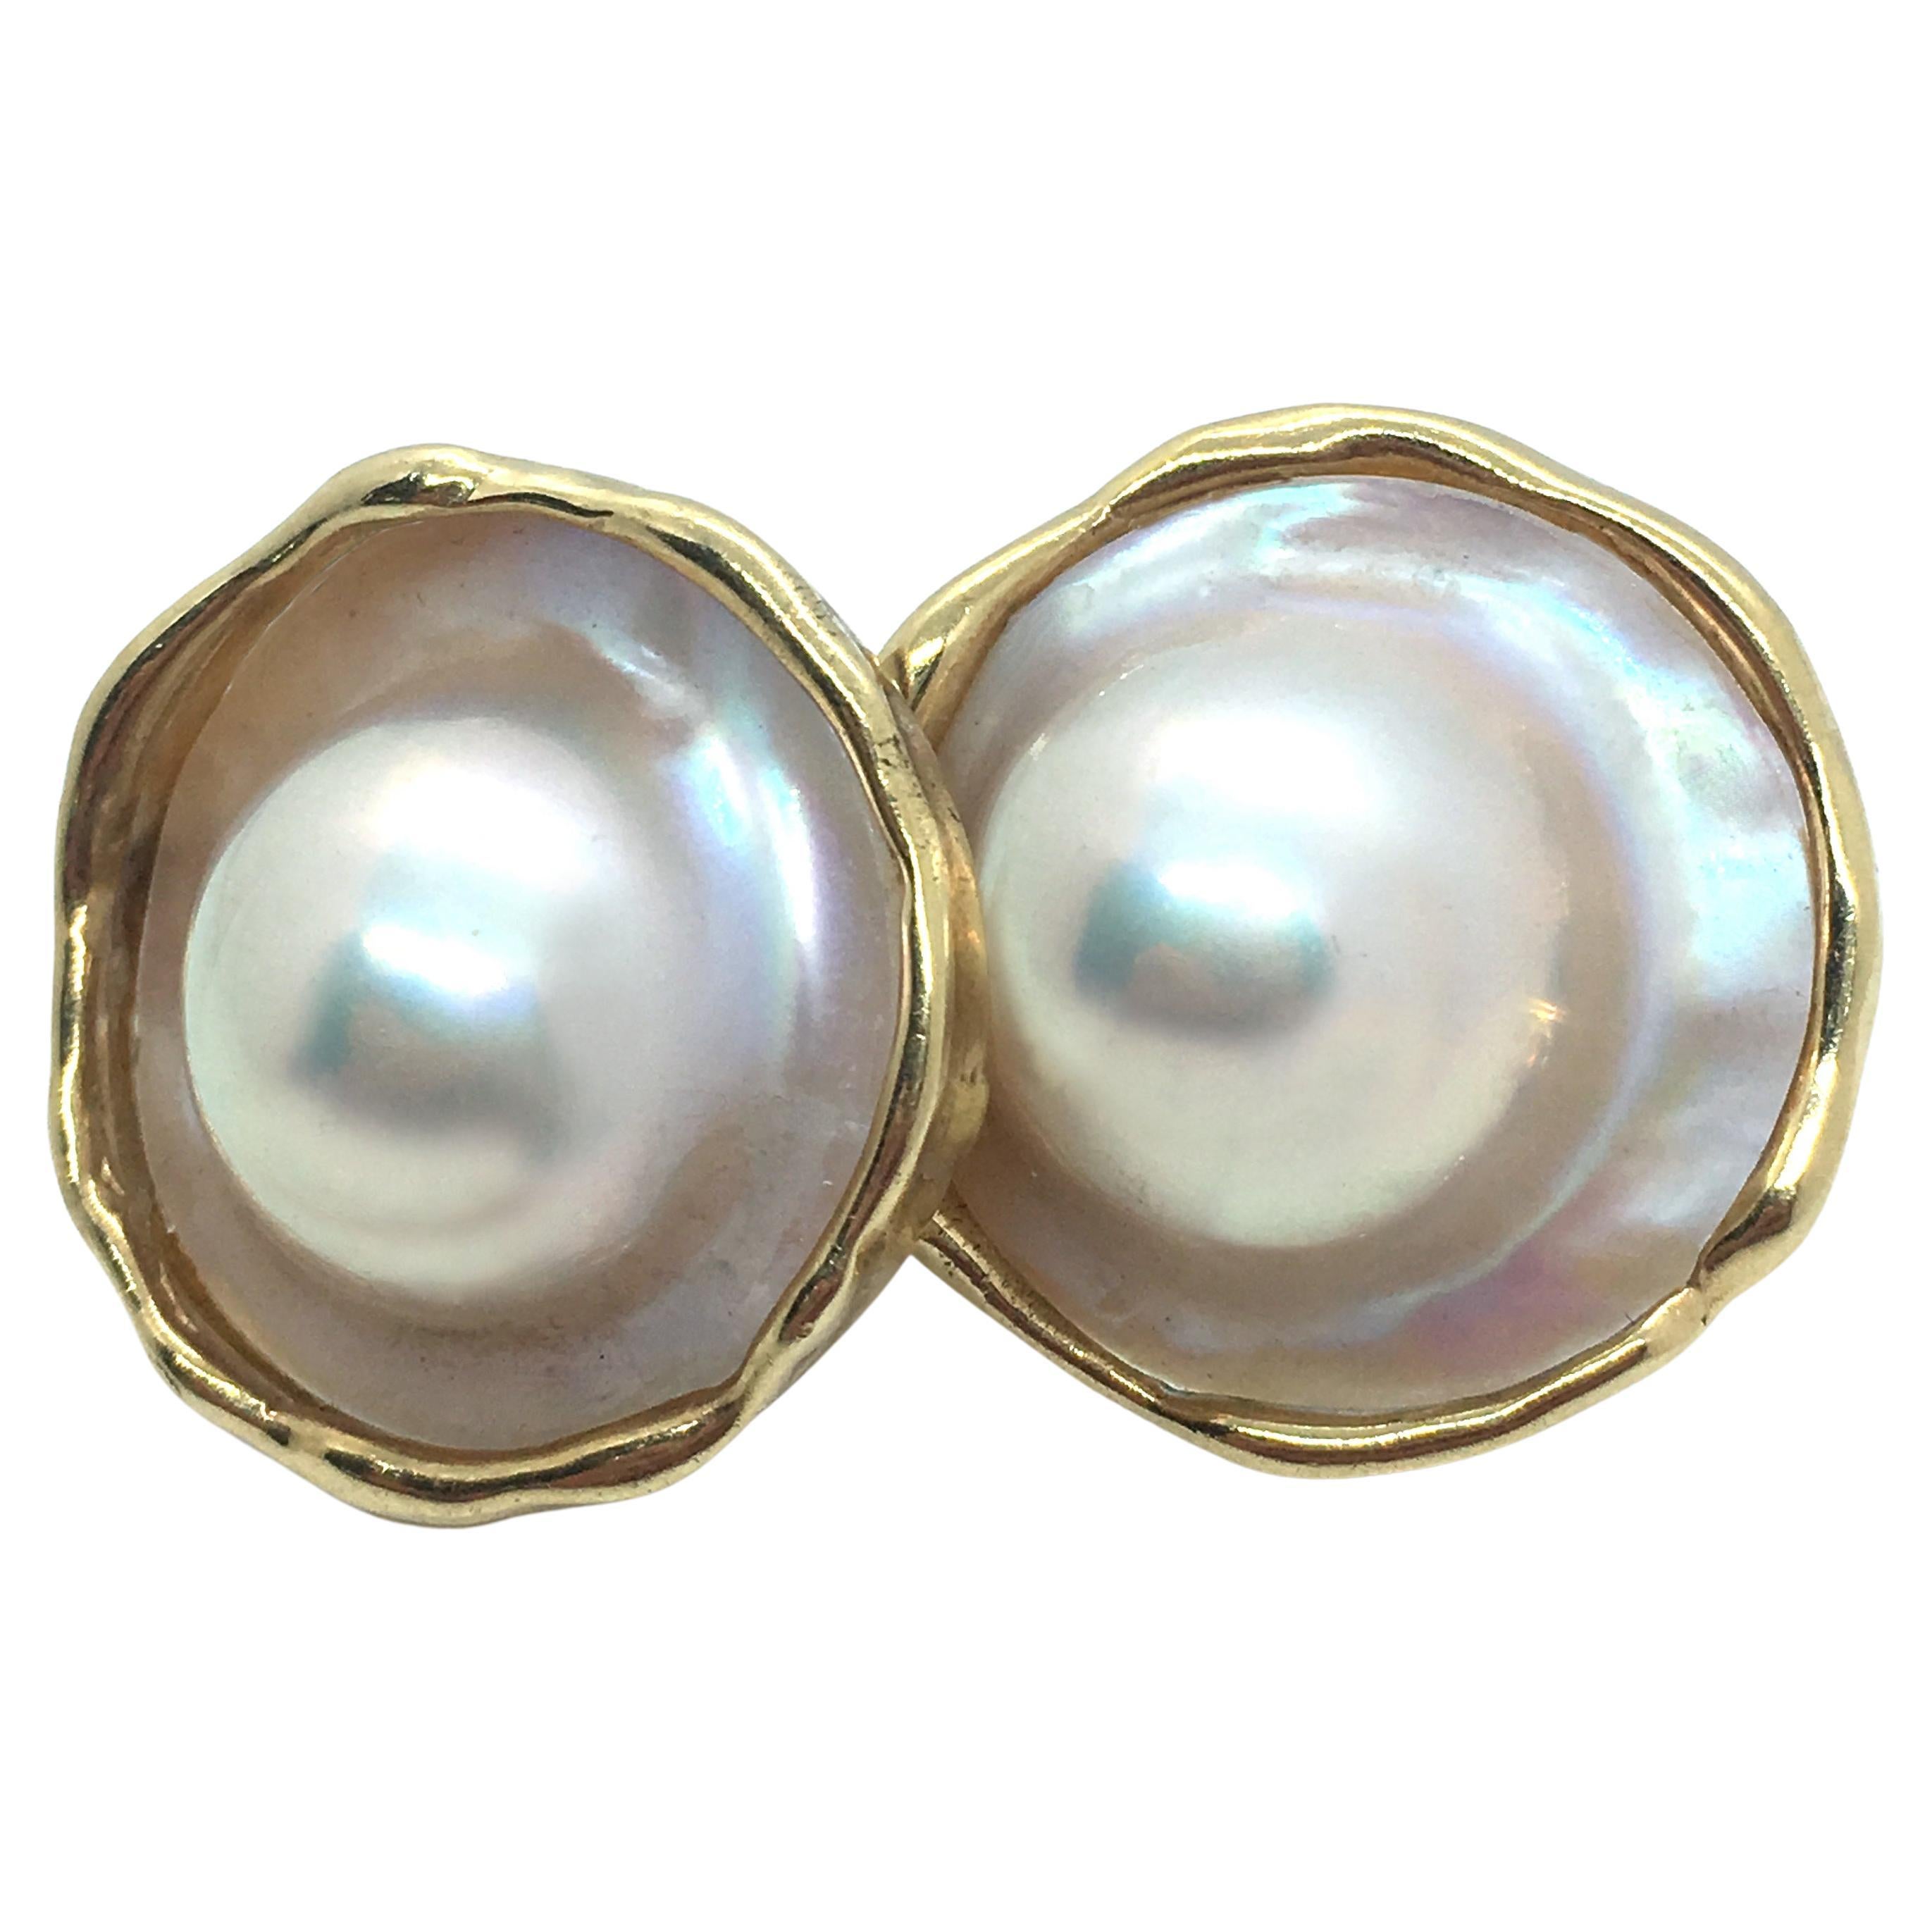 Two gorgeous mabe pearls -- white with pink overtones -- are set in graceful 14 karat yellow gold frames hand-crafted by Eytan Brandes.

The blisters measure approximately 16.5mm while the earrings are just under 1 inch wide.

The post closures stay